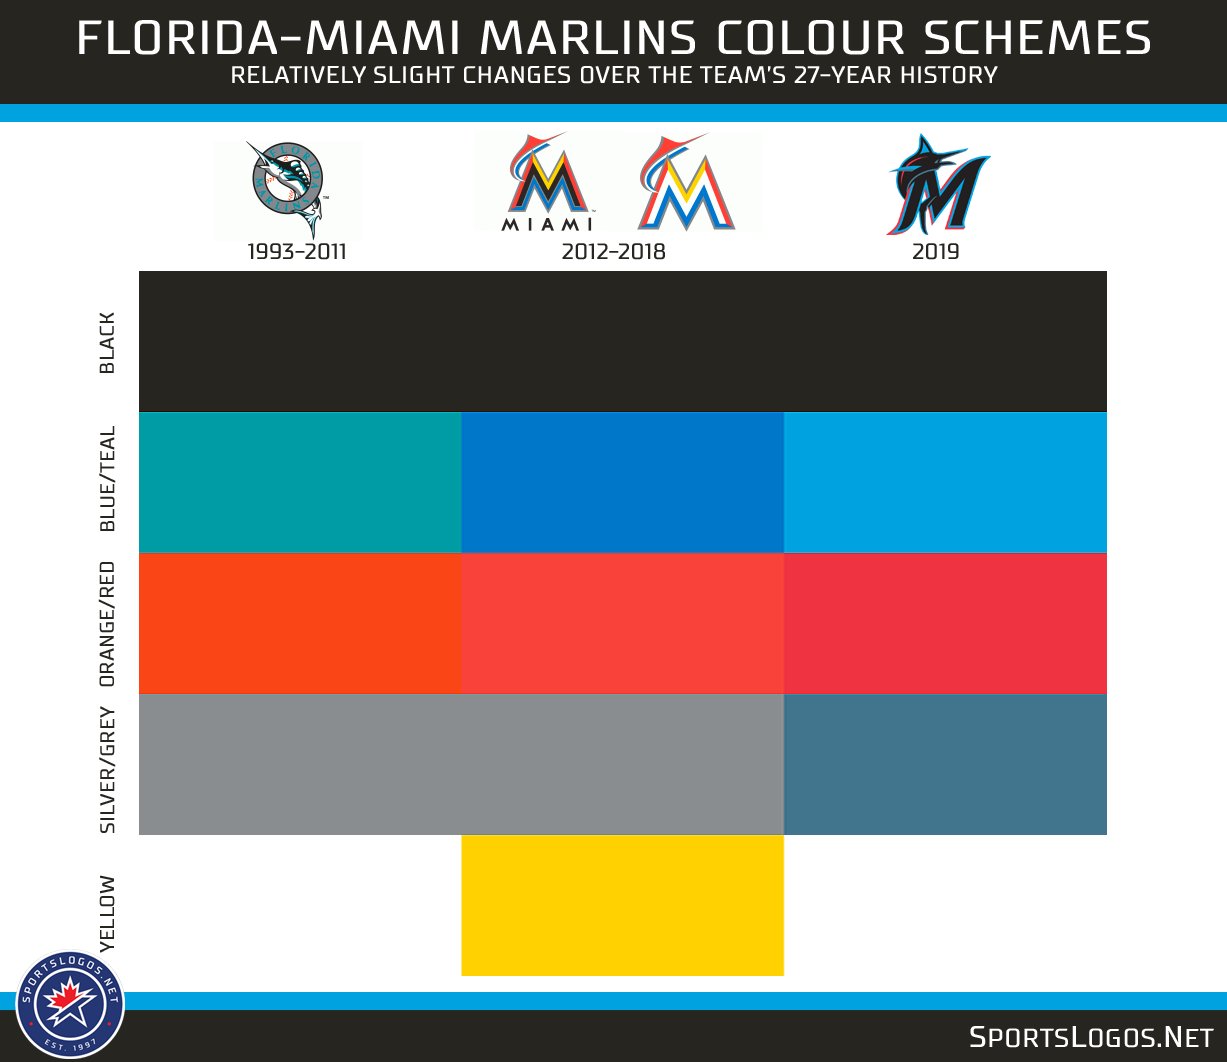 Chris Creamer  SportsLogos.Net on X: New Miami #Marlins colour scheme is  officially listed as Miami Blue, Caliente Red, Midnight Black, and Slate  Grey. While the logos and uniforms have changed drastically